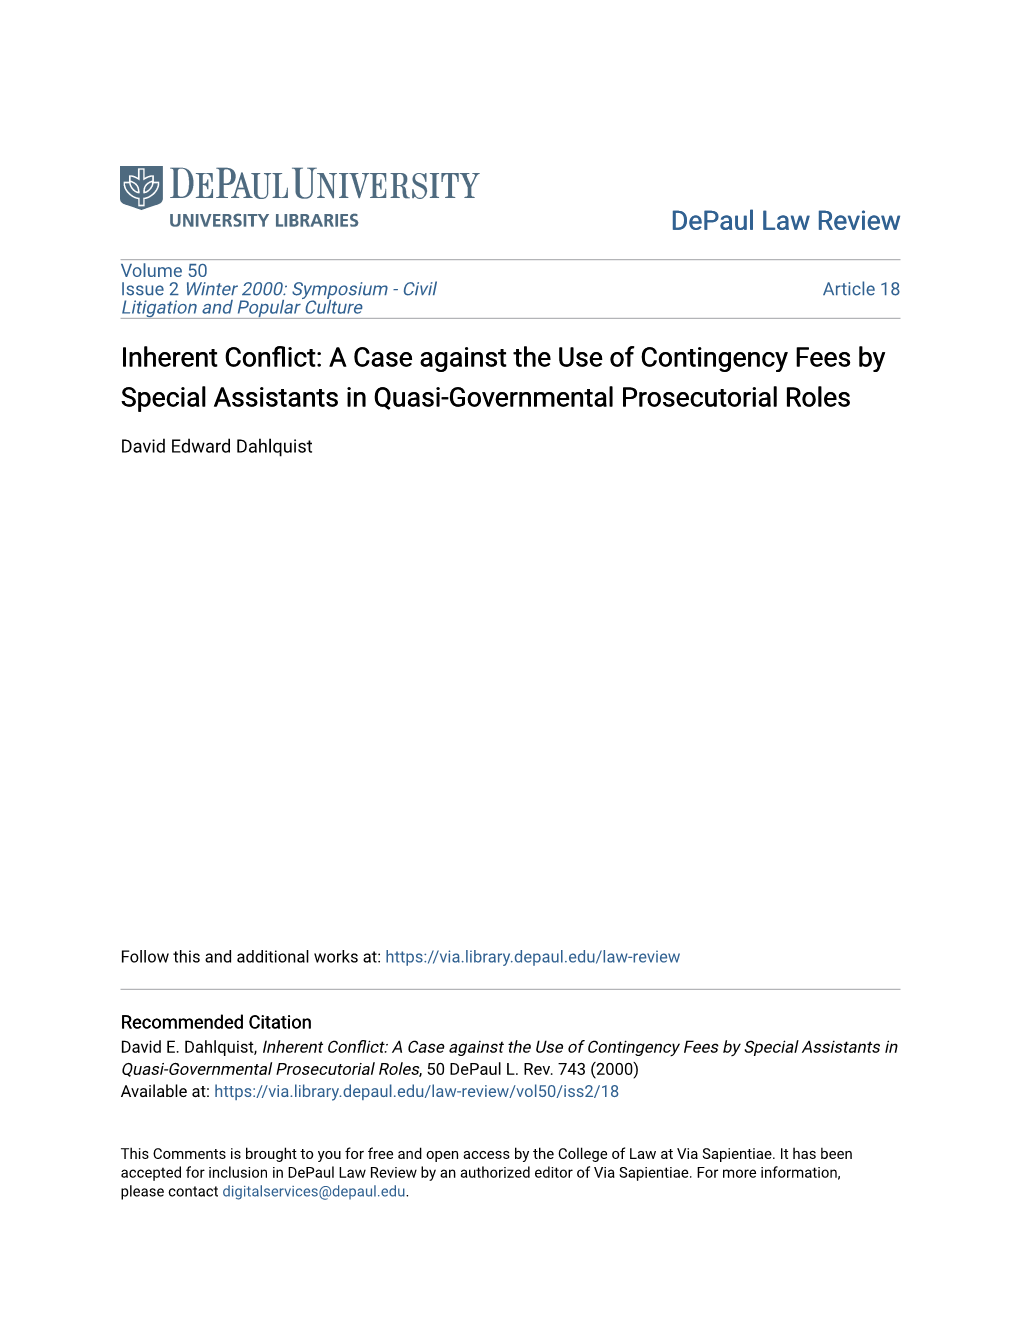 Inherent Conflict: a Case Against the Use of Contingency Eesf by Special Assistants in Quasi-Governmental Prosecutorial Roles